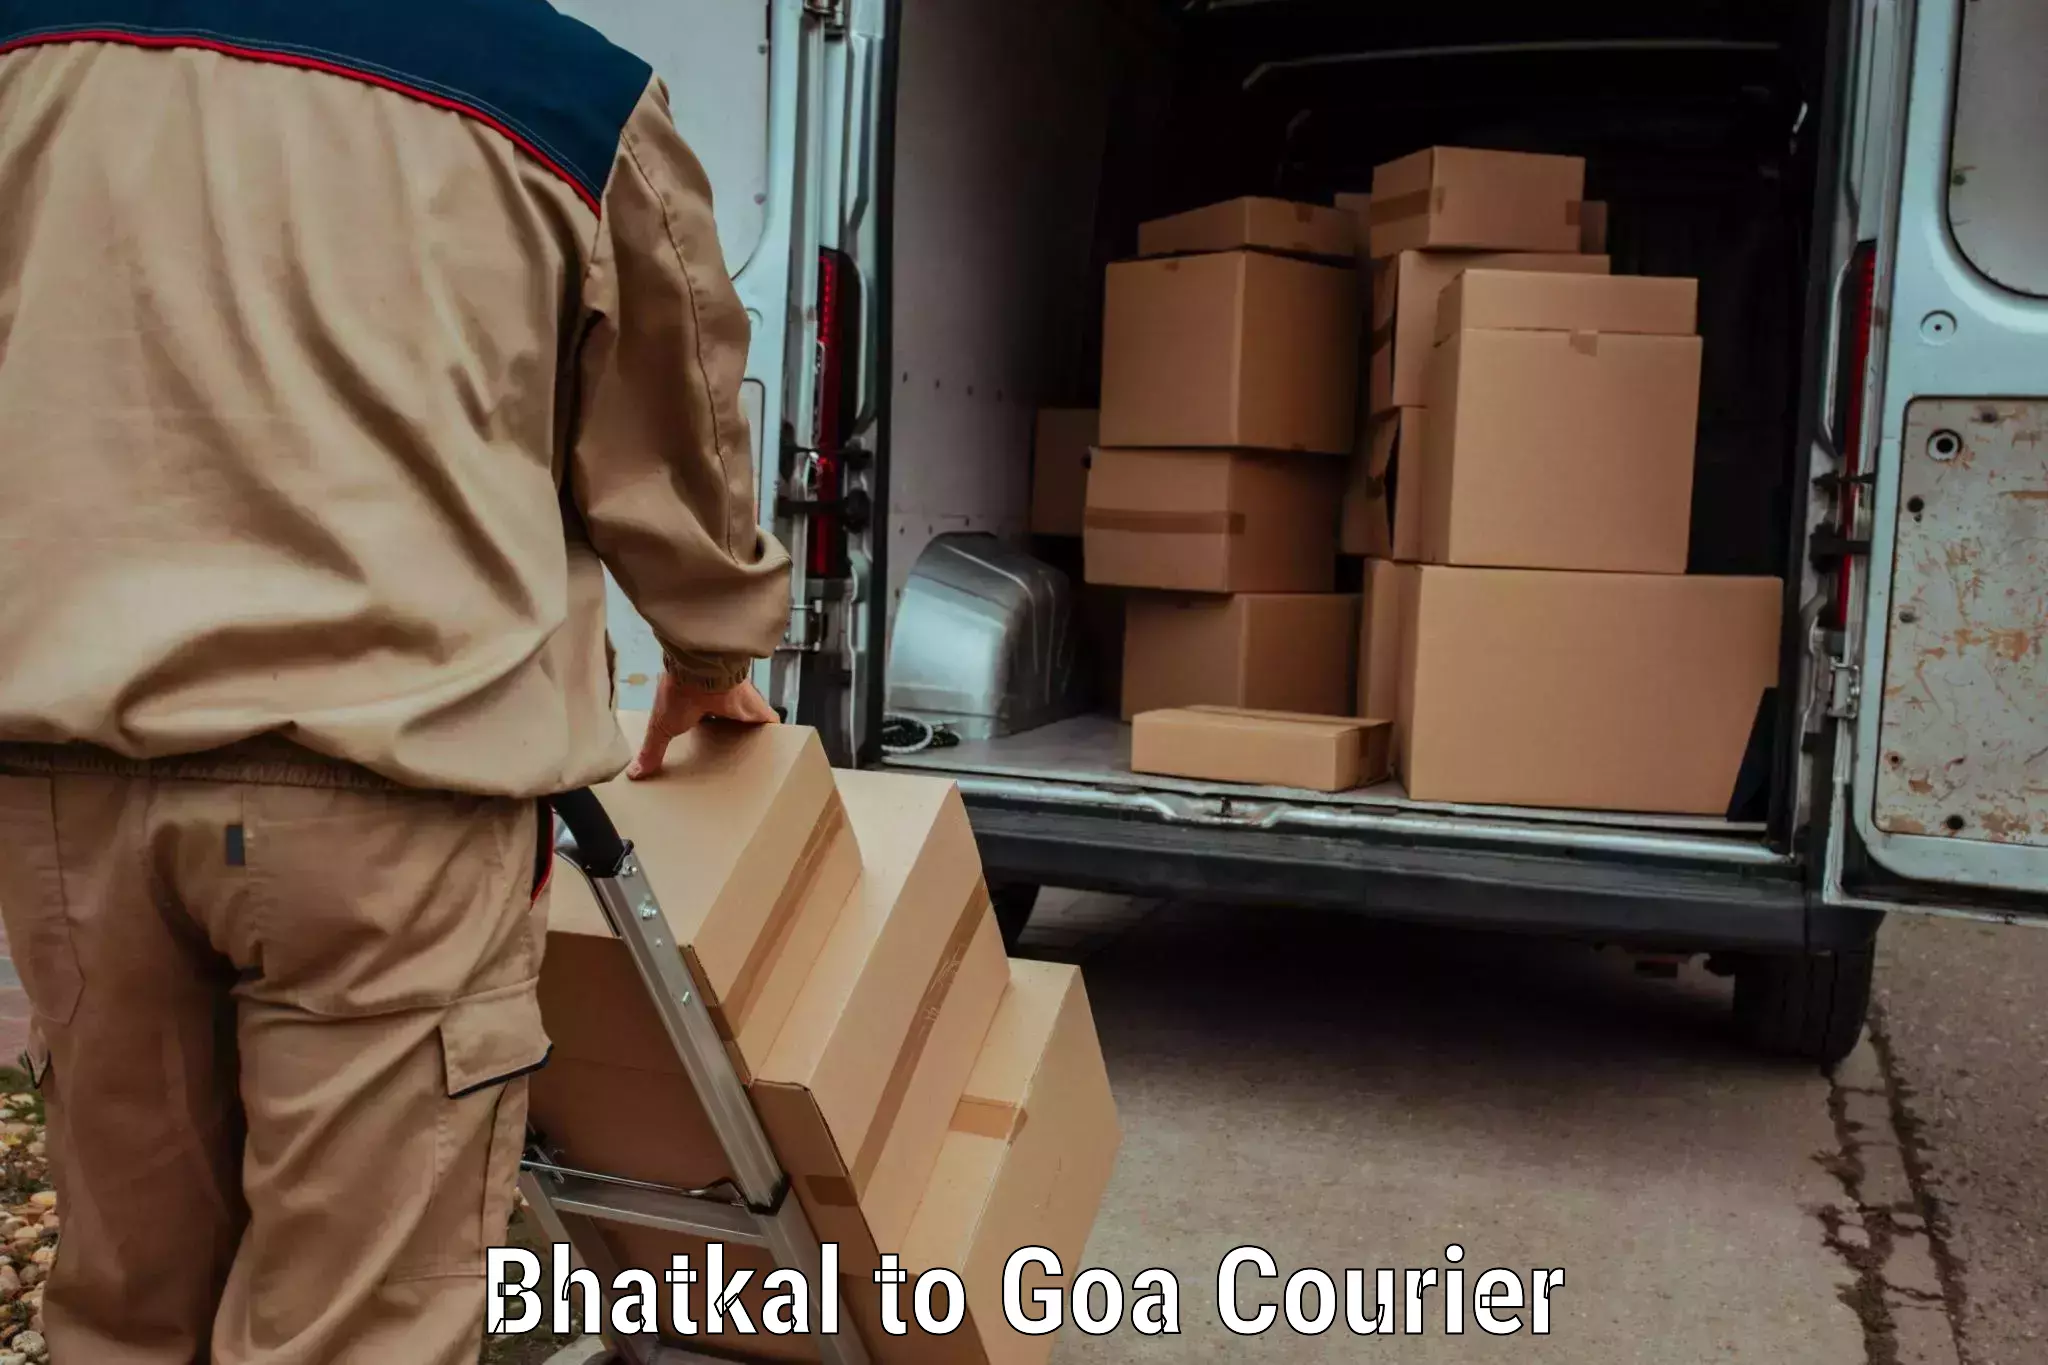 Global shipping networks Bhatkal to Margao